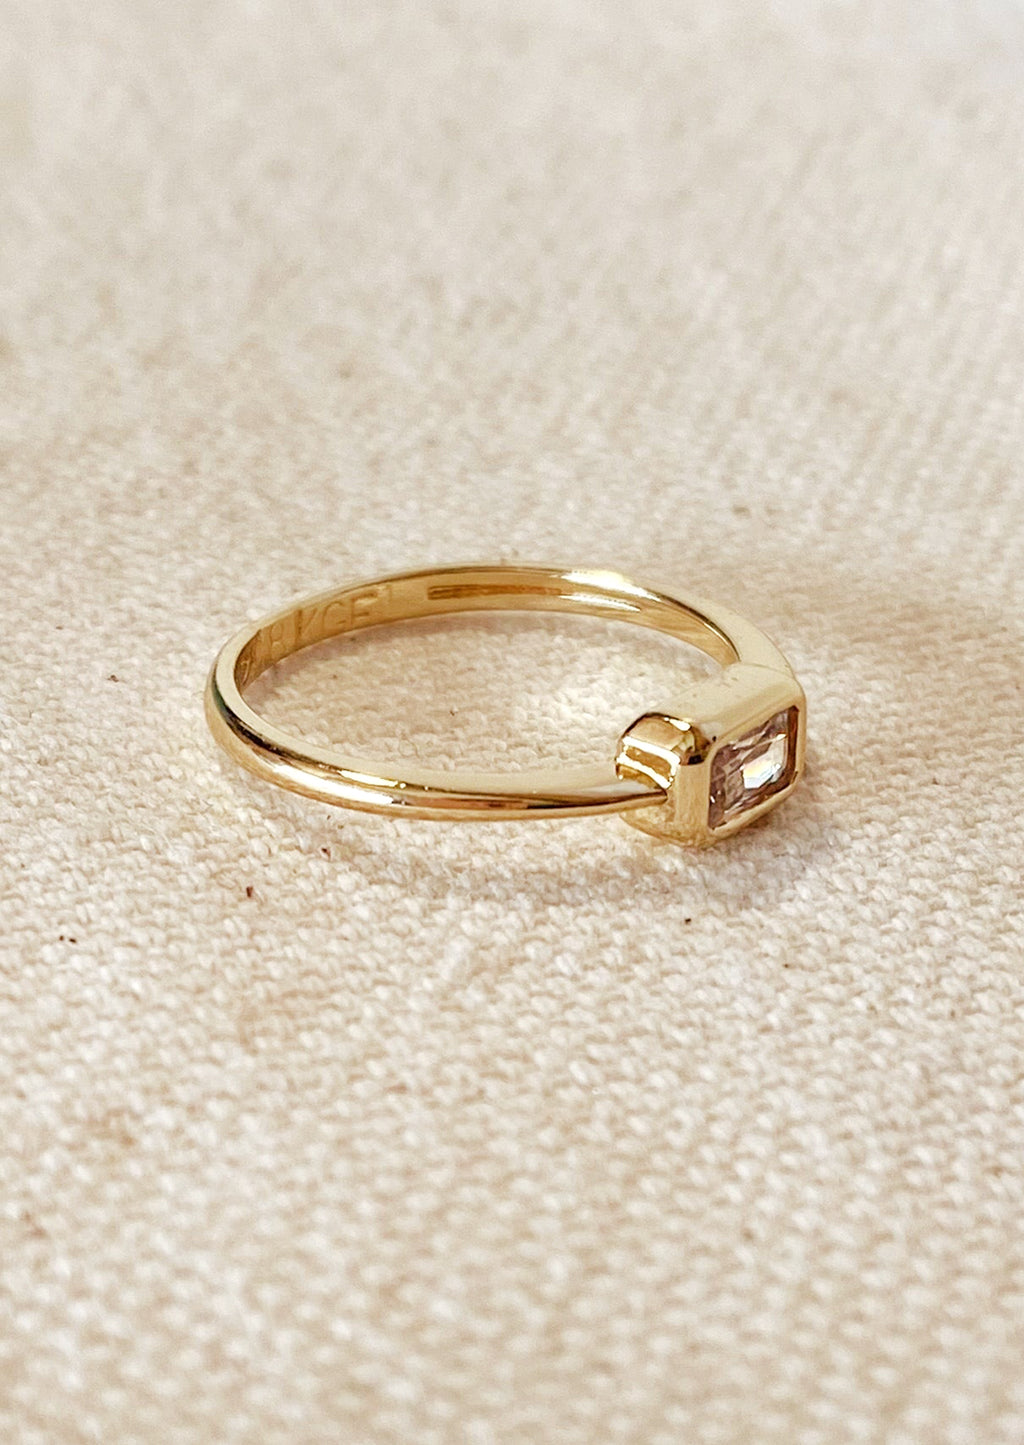 3: A gold ring with single rectangular clear stone.